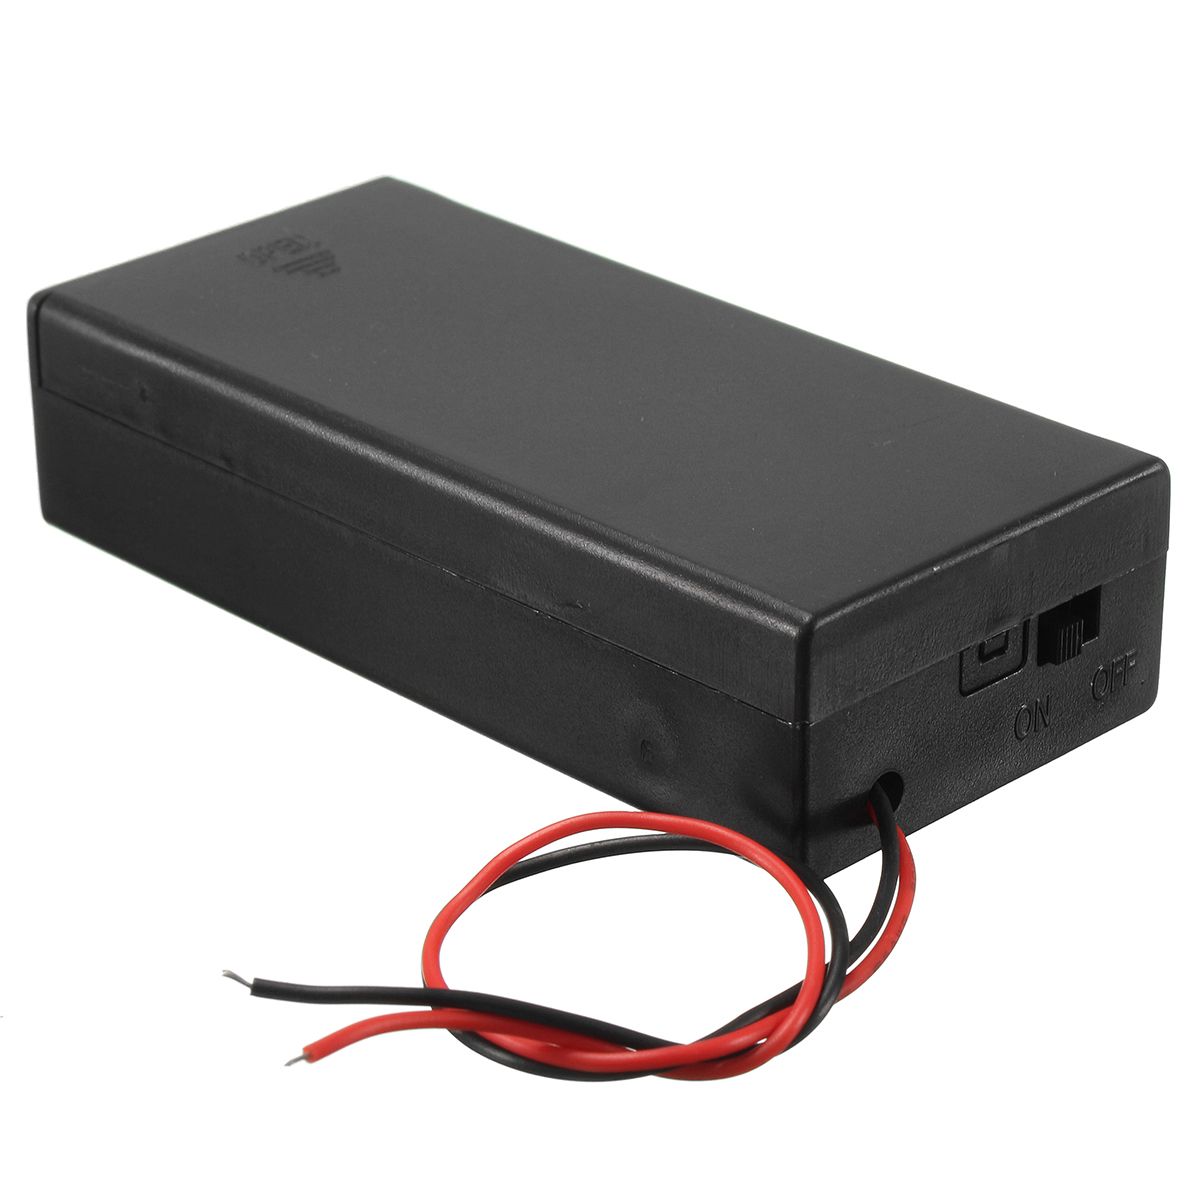 3pcs-Plastic-Battery-Holder-Storage-Box-Case-Container-wONOFF-Switch-For-2x18650-Batteries-37V-1444330